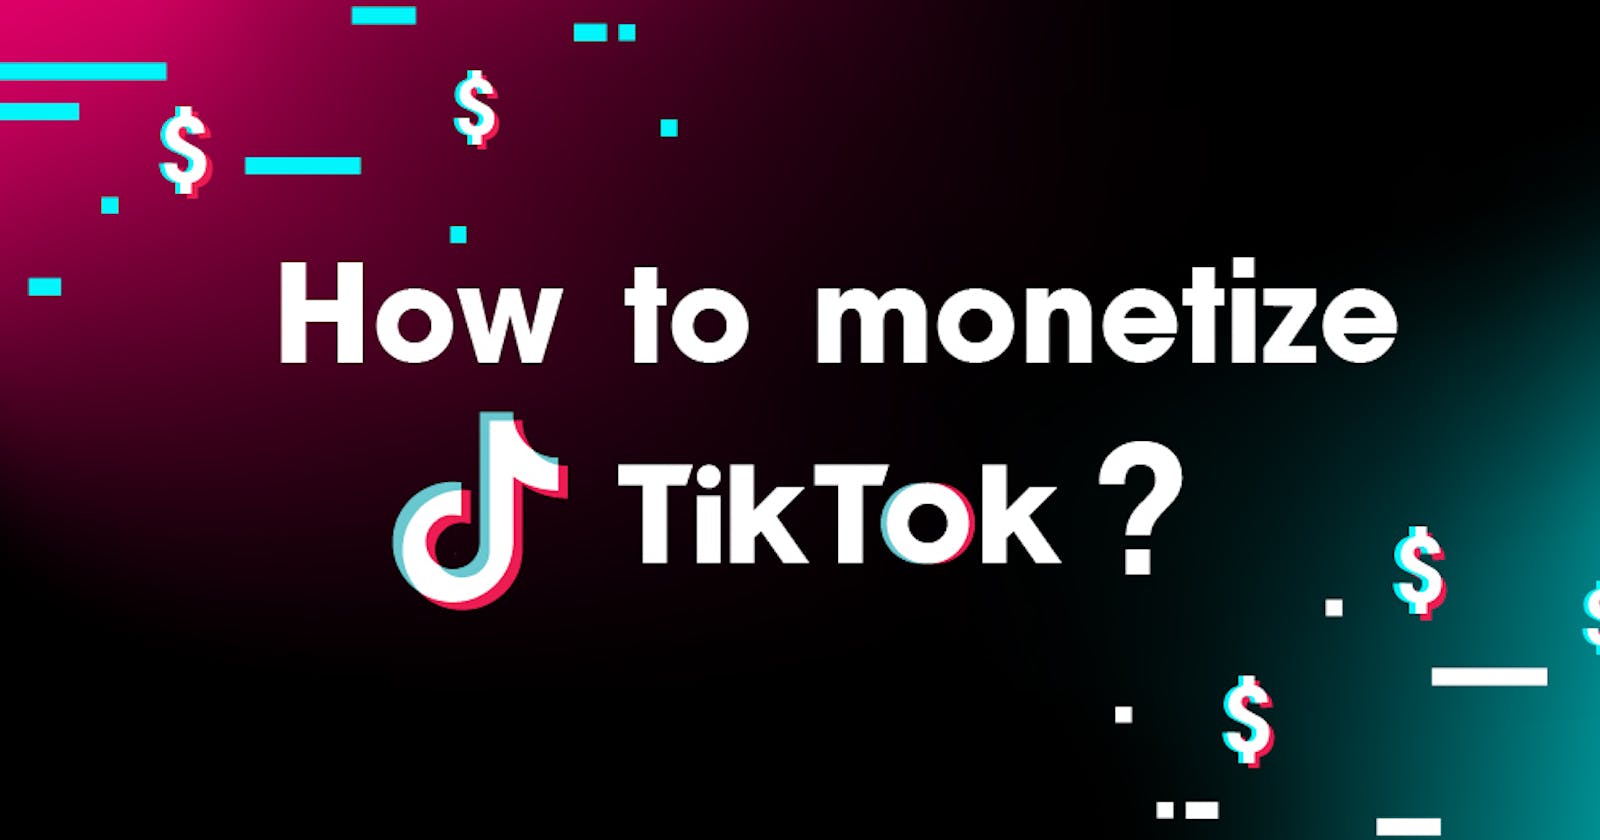 Everyone is using this creator network to monetize their TikTok